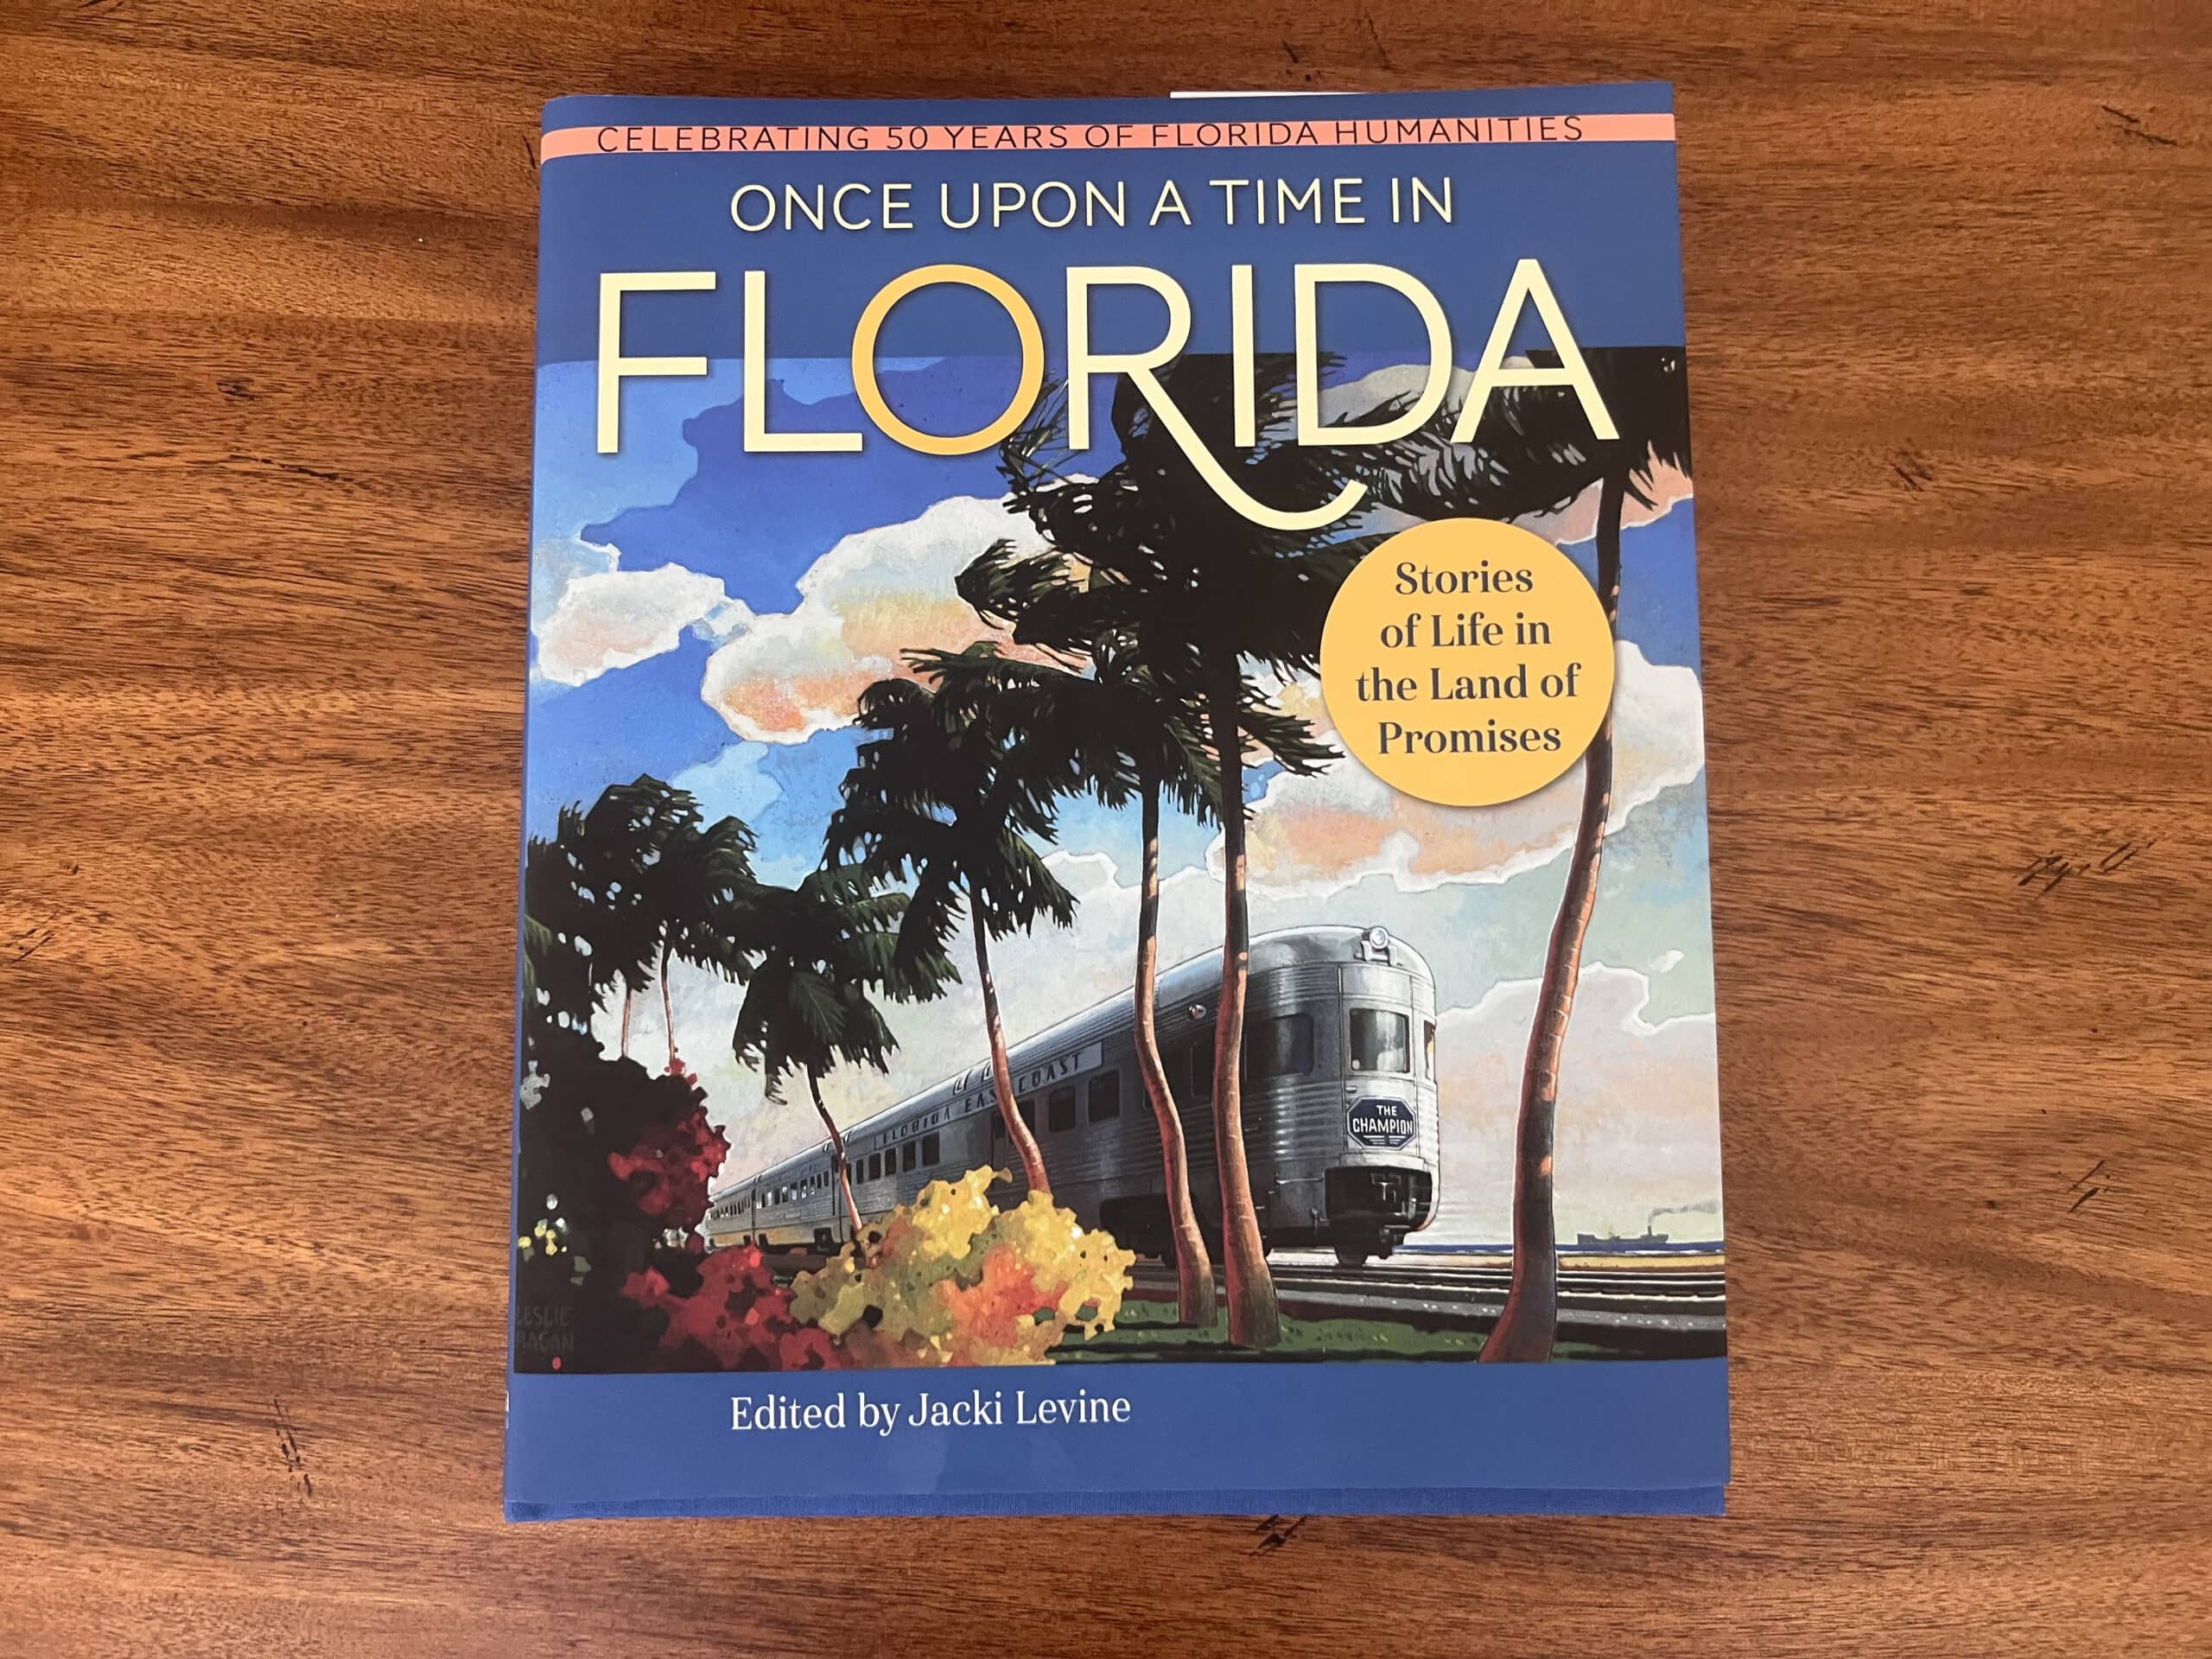 University Press of Florida: Once Upon a Time in Florida